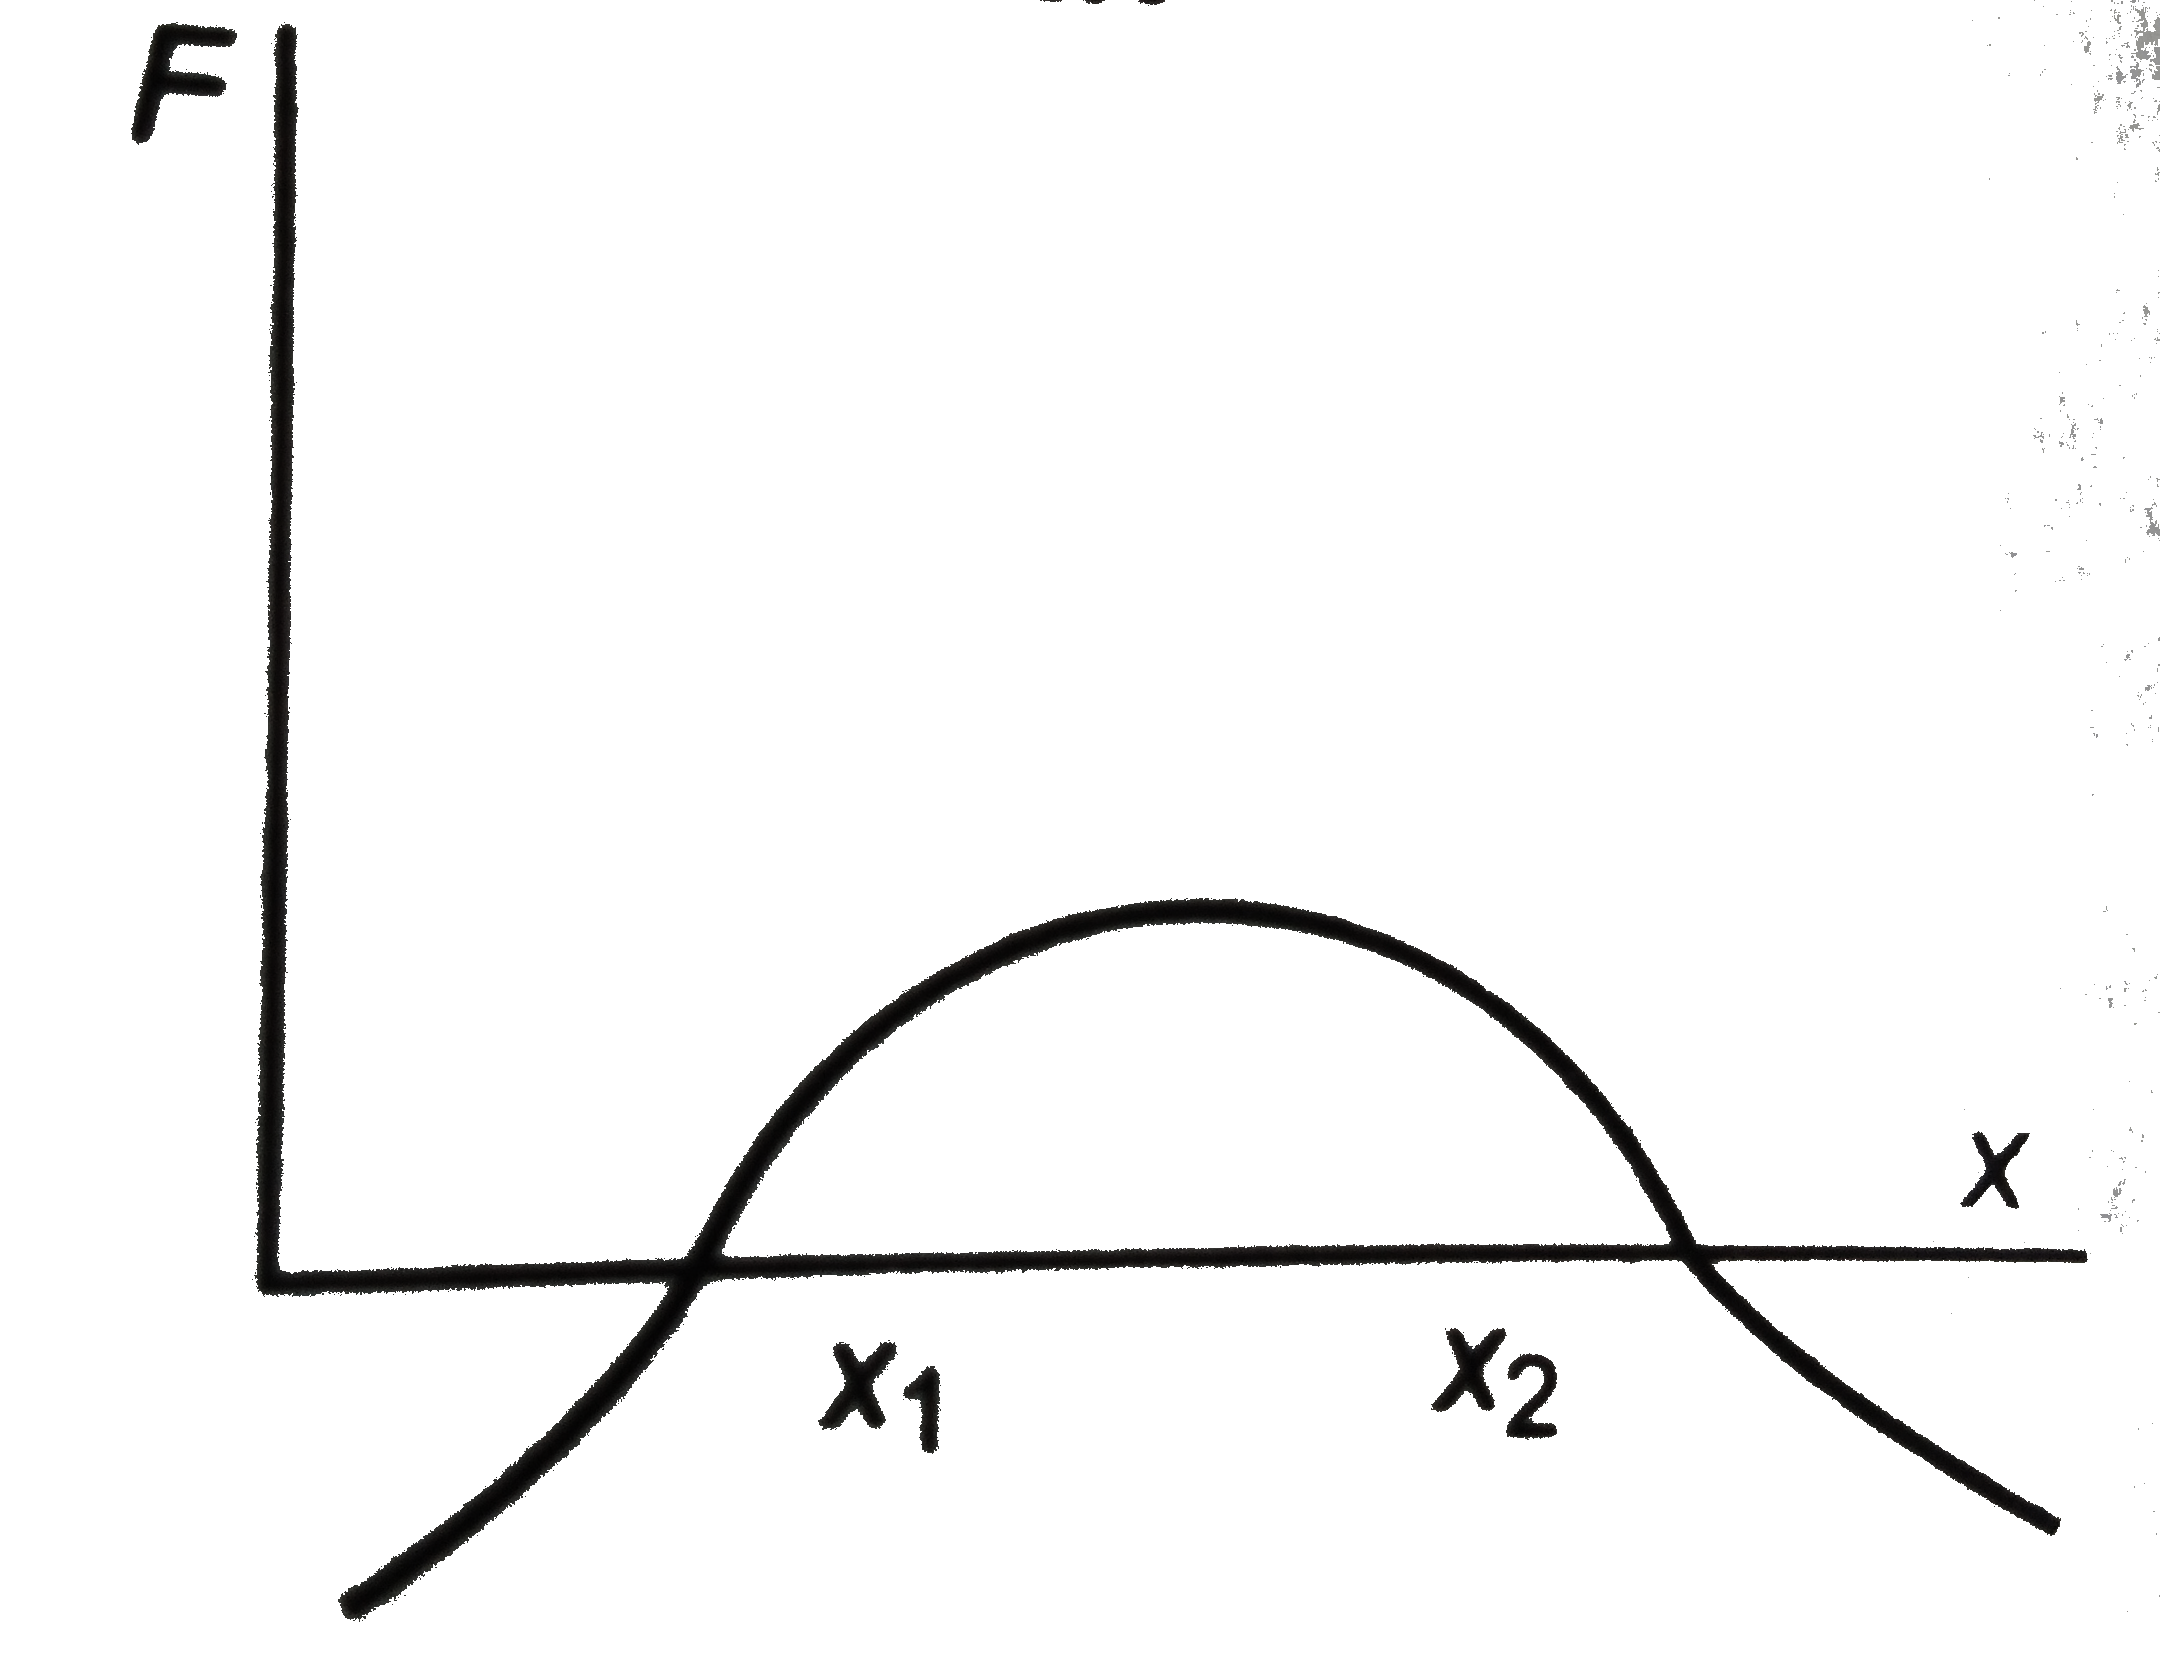 The force acting on a body moving along x-axis varies with the position of the  particle shown in the figure. The body is in stable equilibrium at   .